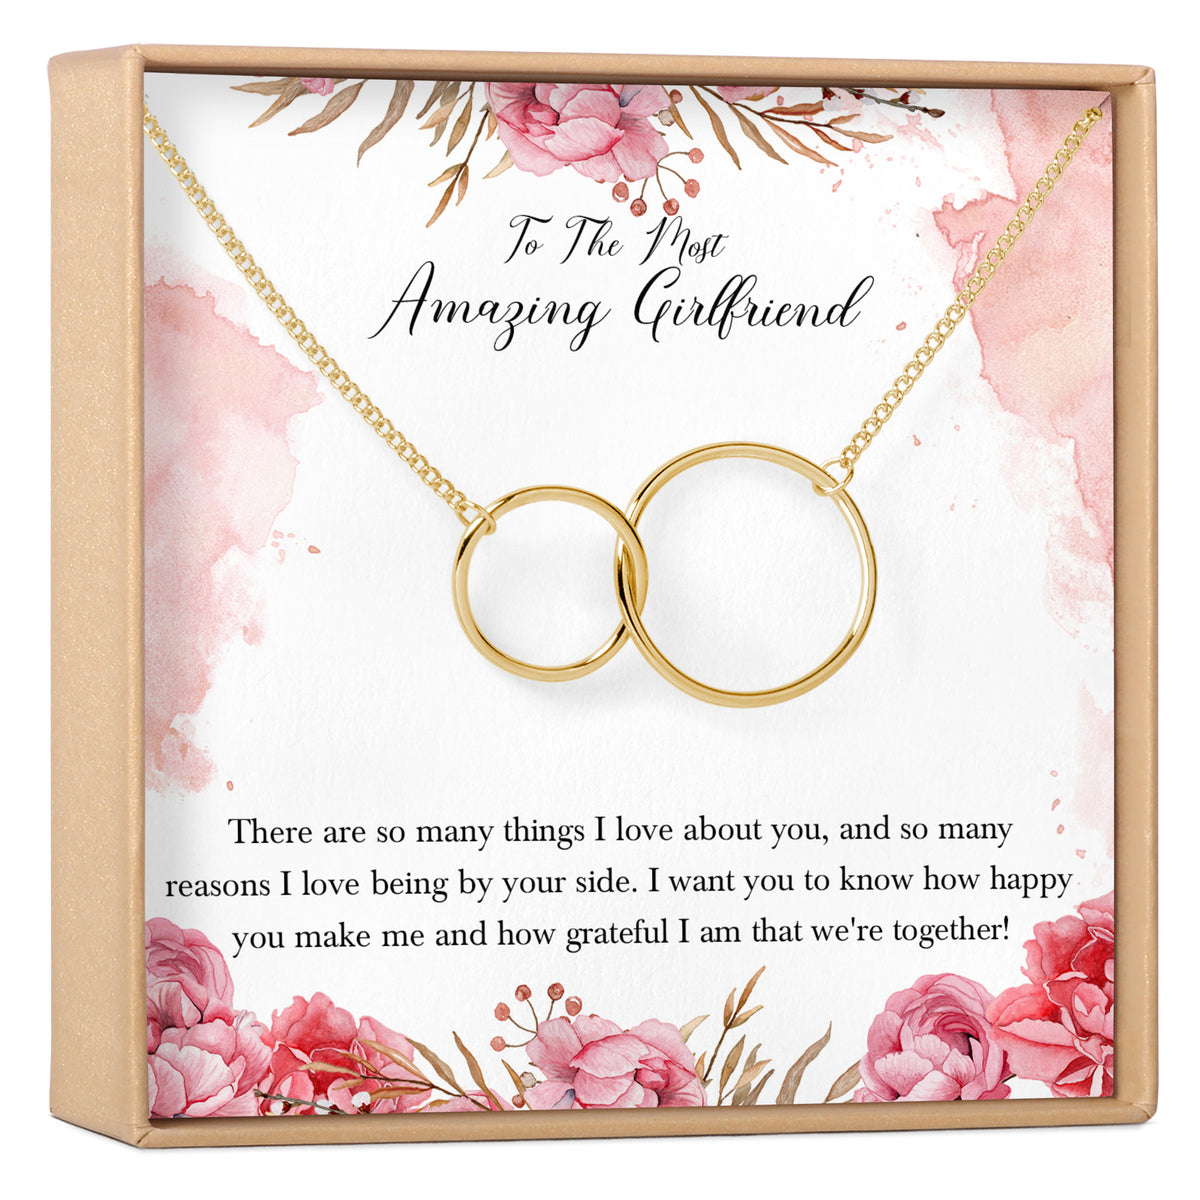 Gift for Girlfriend from Boyfriend Necklace: Anniversary, Valentine's Day, Birthday, Christmas, Thank You, Love You Present, 2 Interlocking Circles